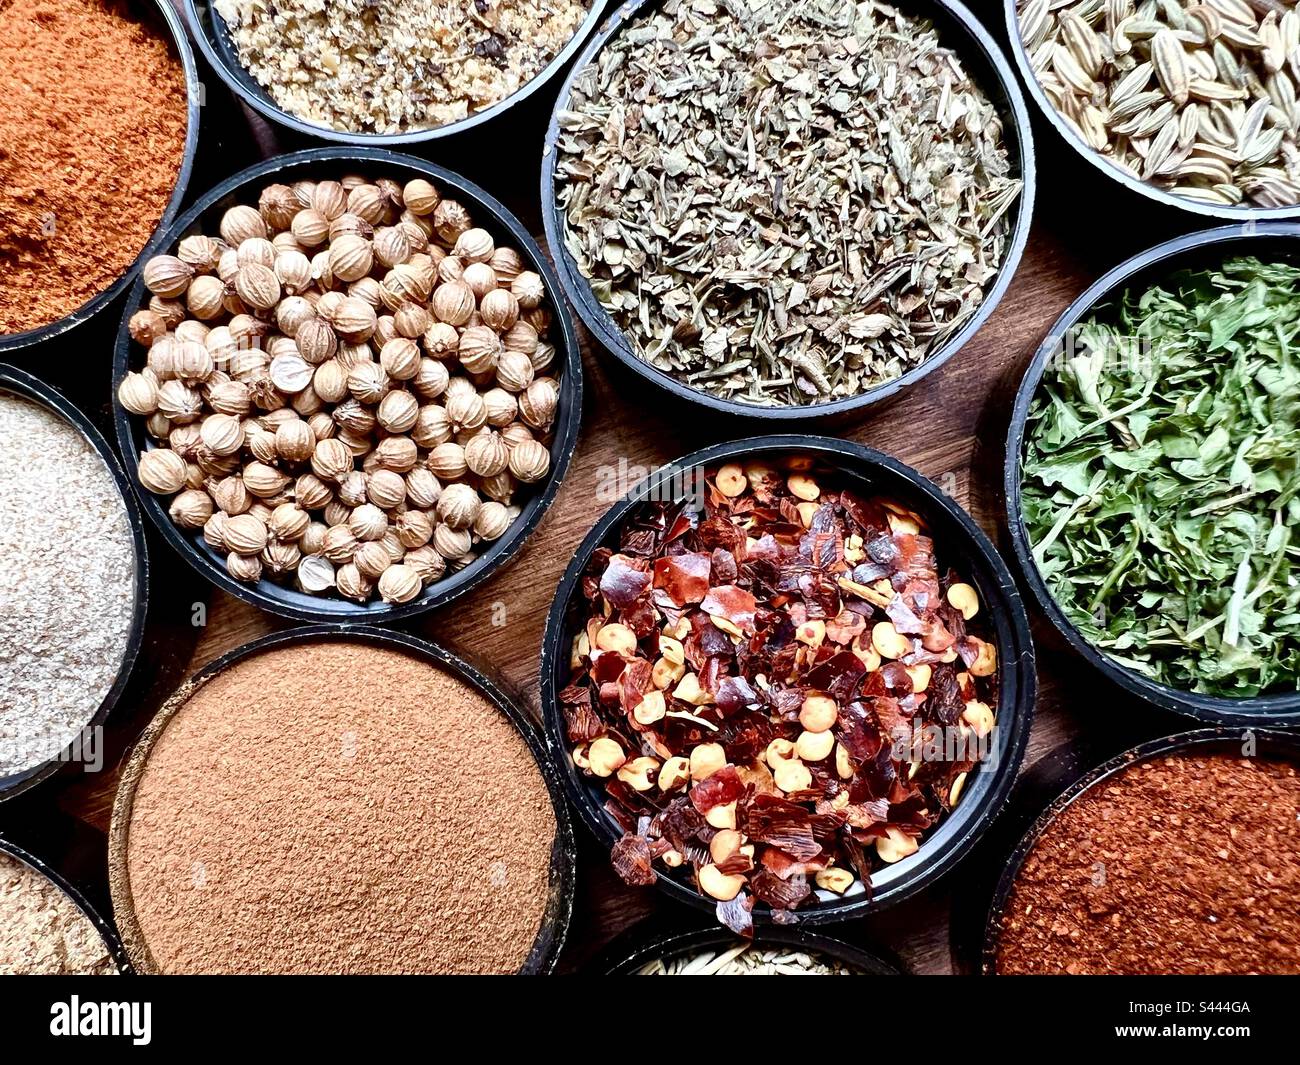 Herbs and spices Stock Photo